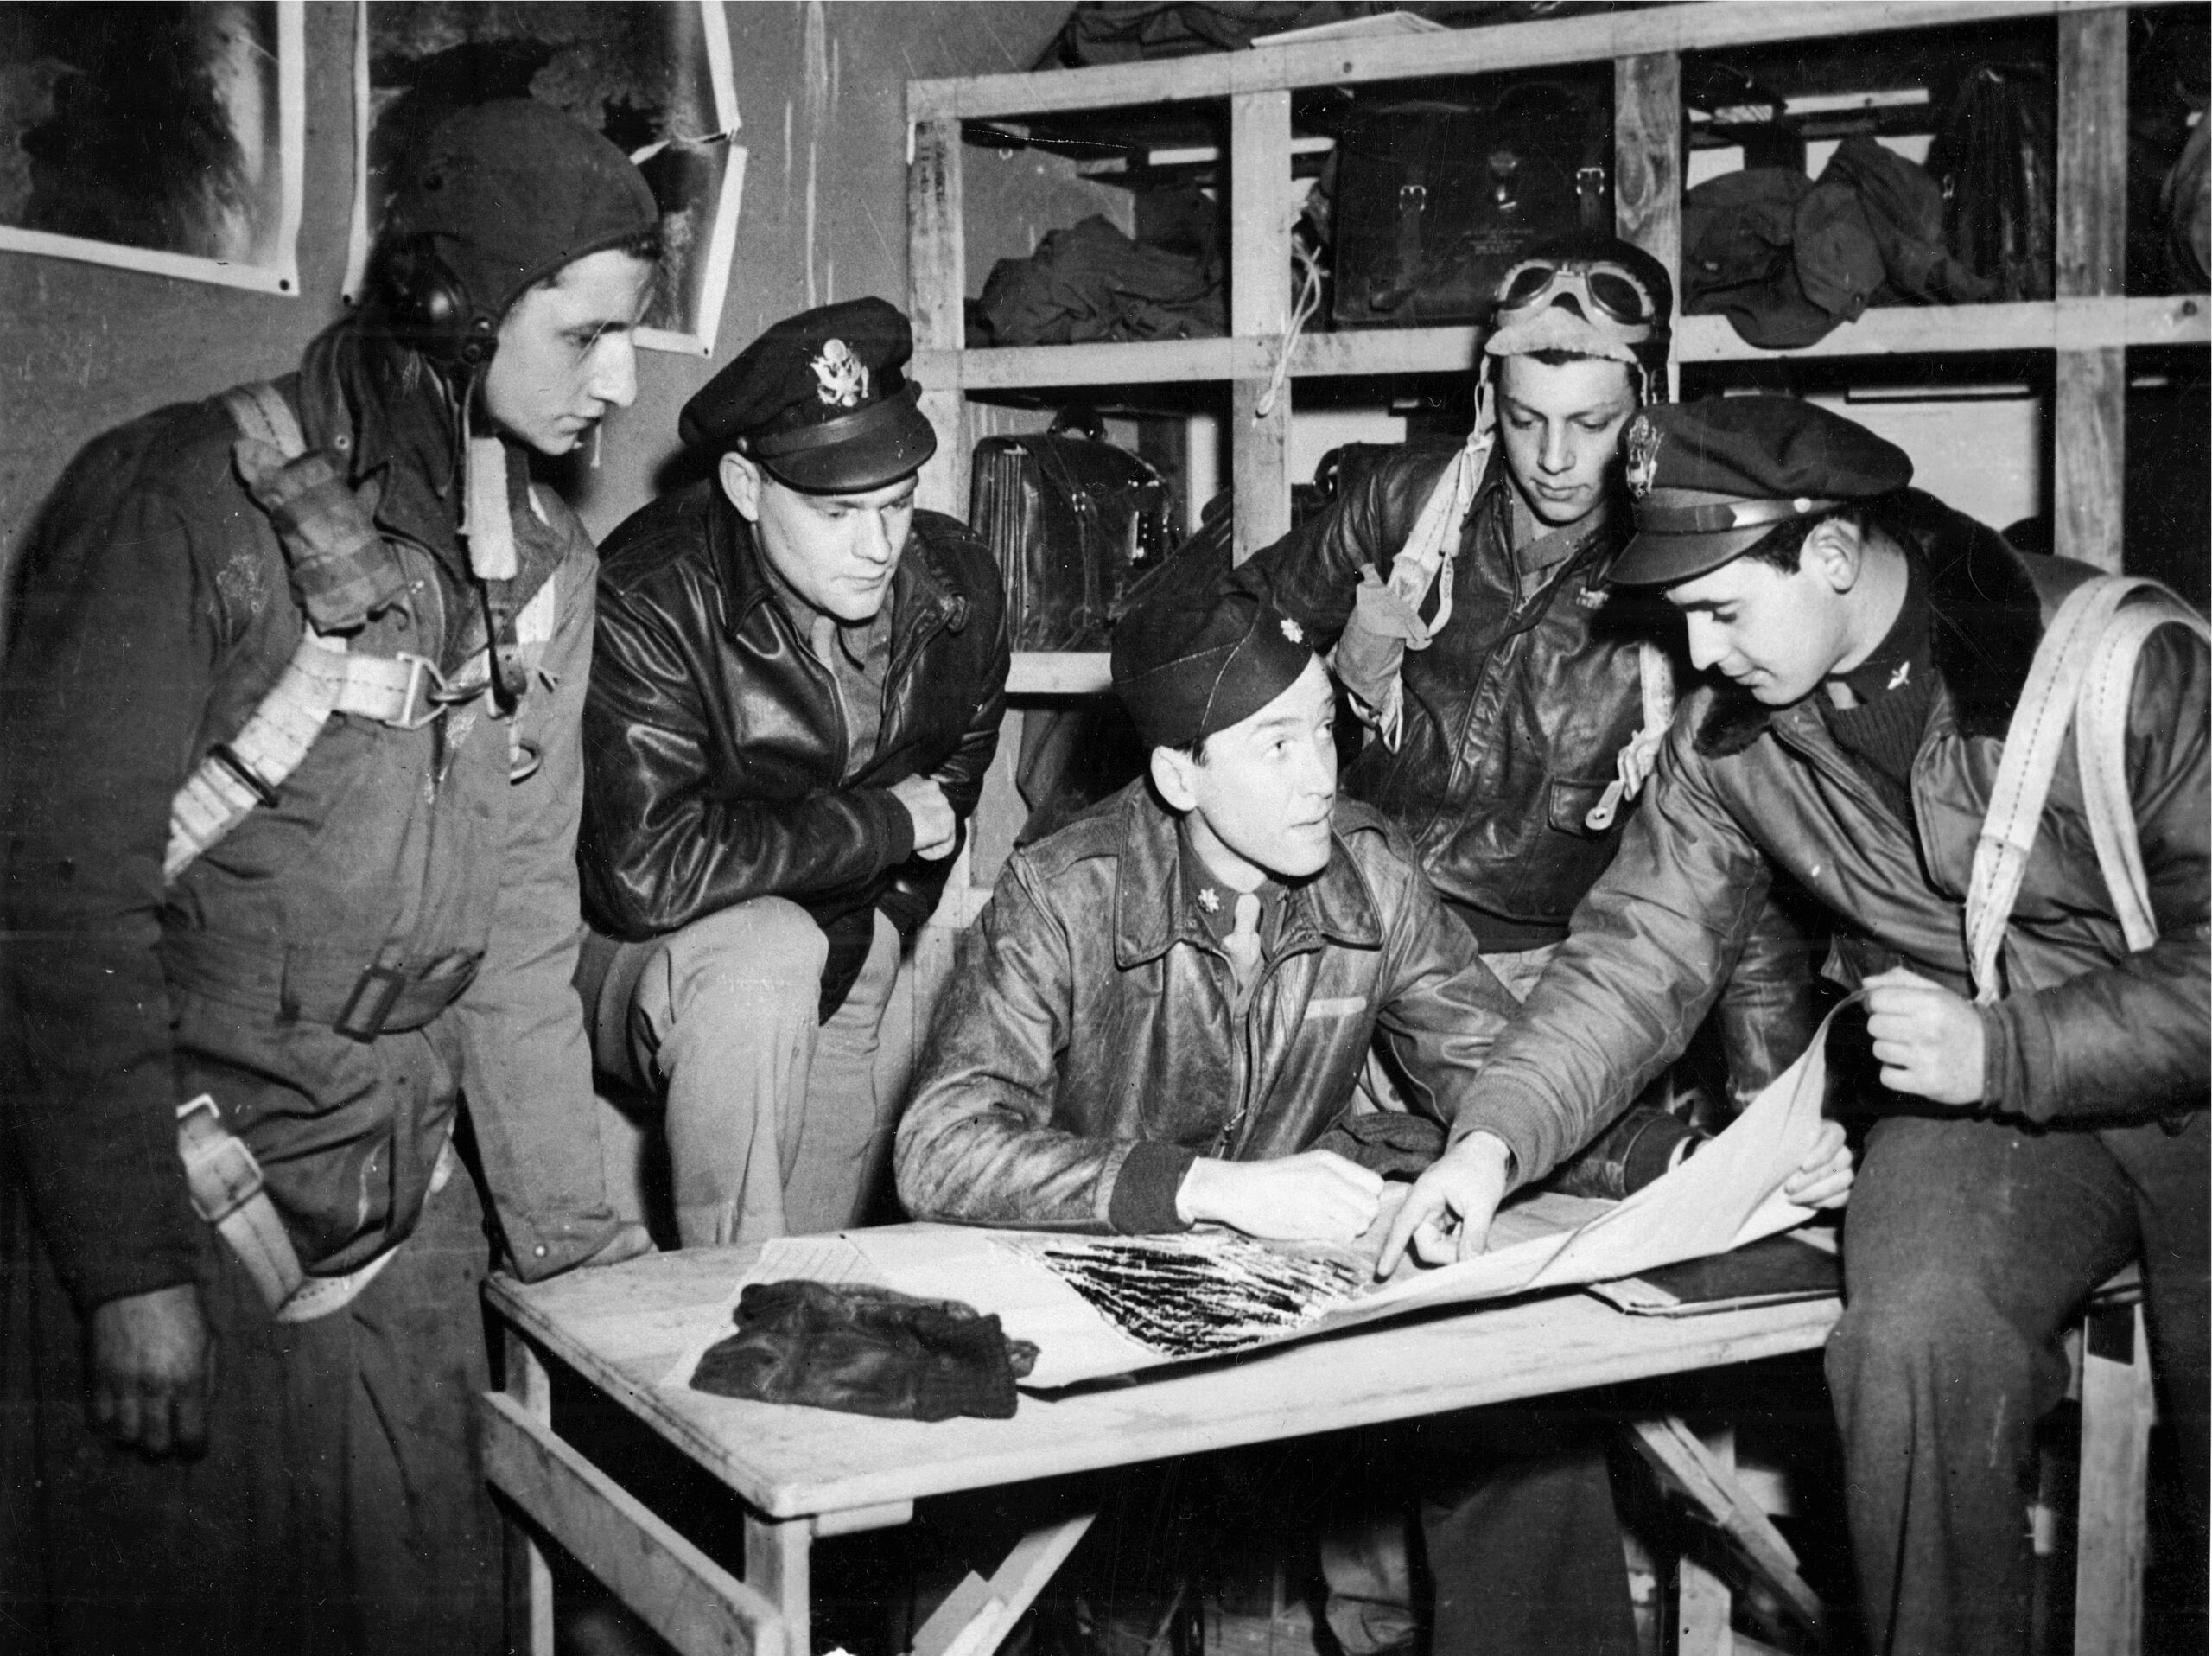 Major James Stewart briefs members of the 453rd Bomb Group before a mission.